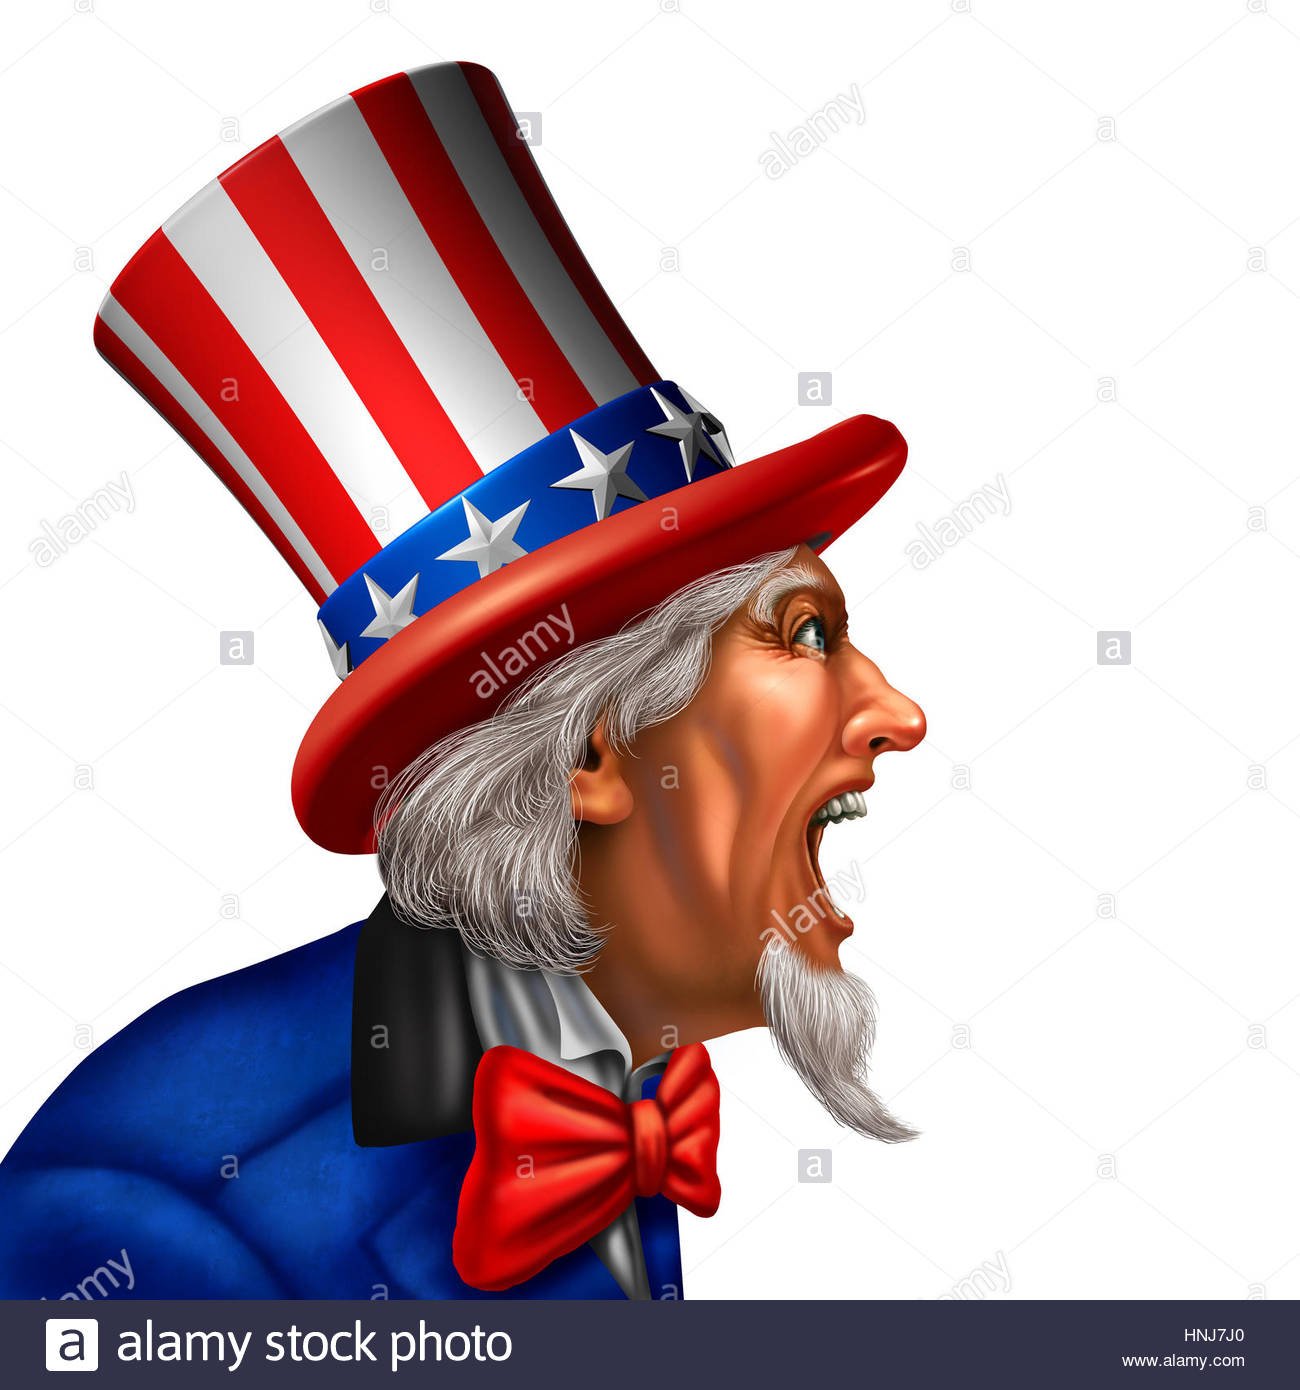 Uncle Sam In A Side Yelling Or Talking On White Background